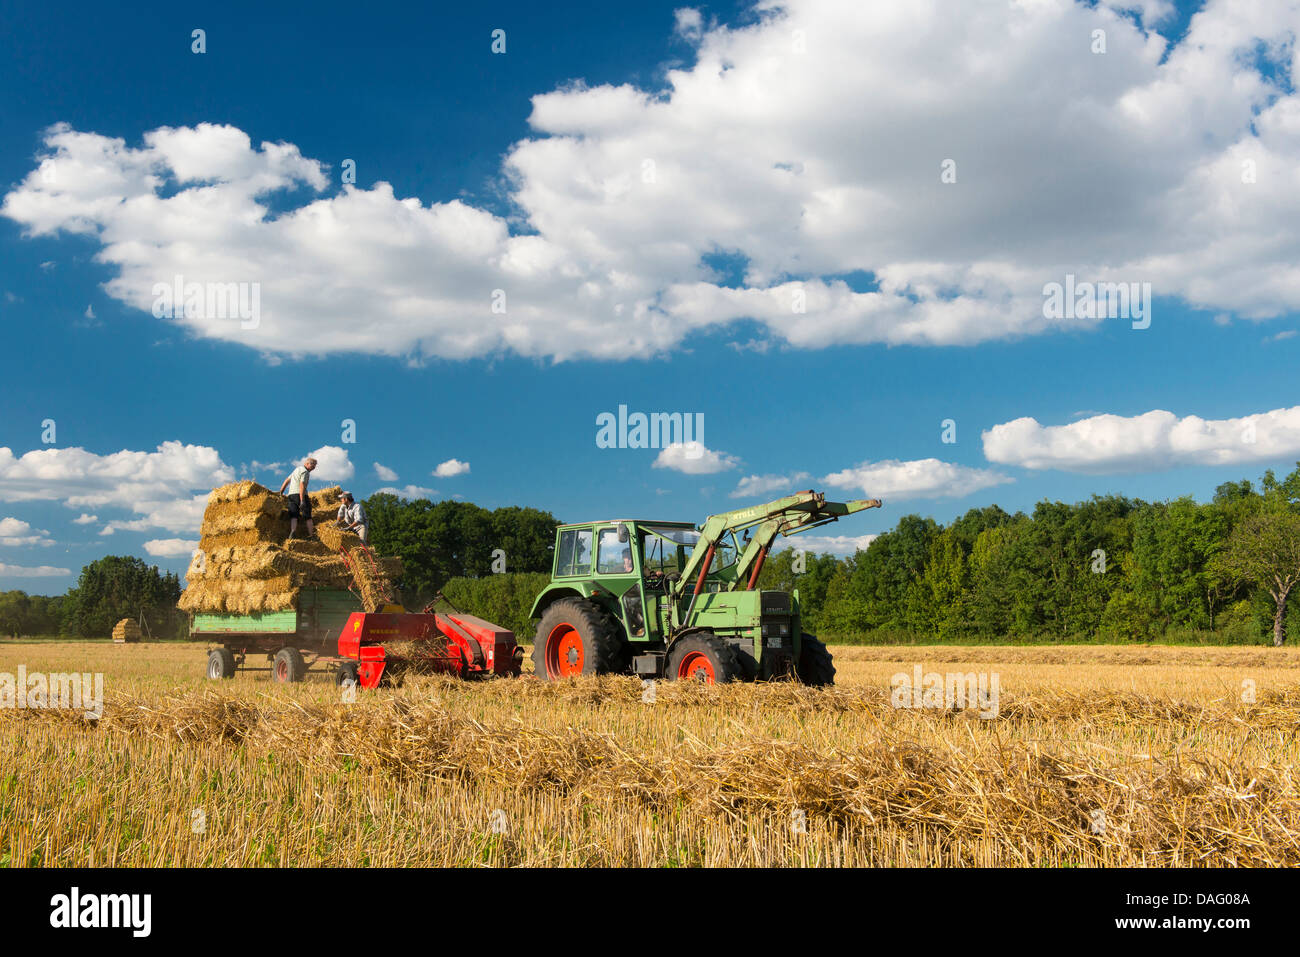 farmer on tractor with baler and trailer harvesting on a grain field, Germany Stock Photo